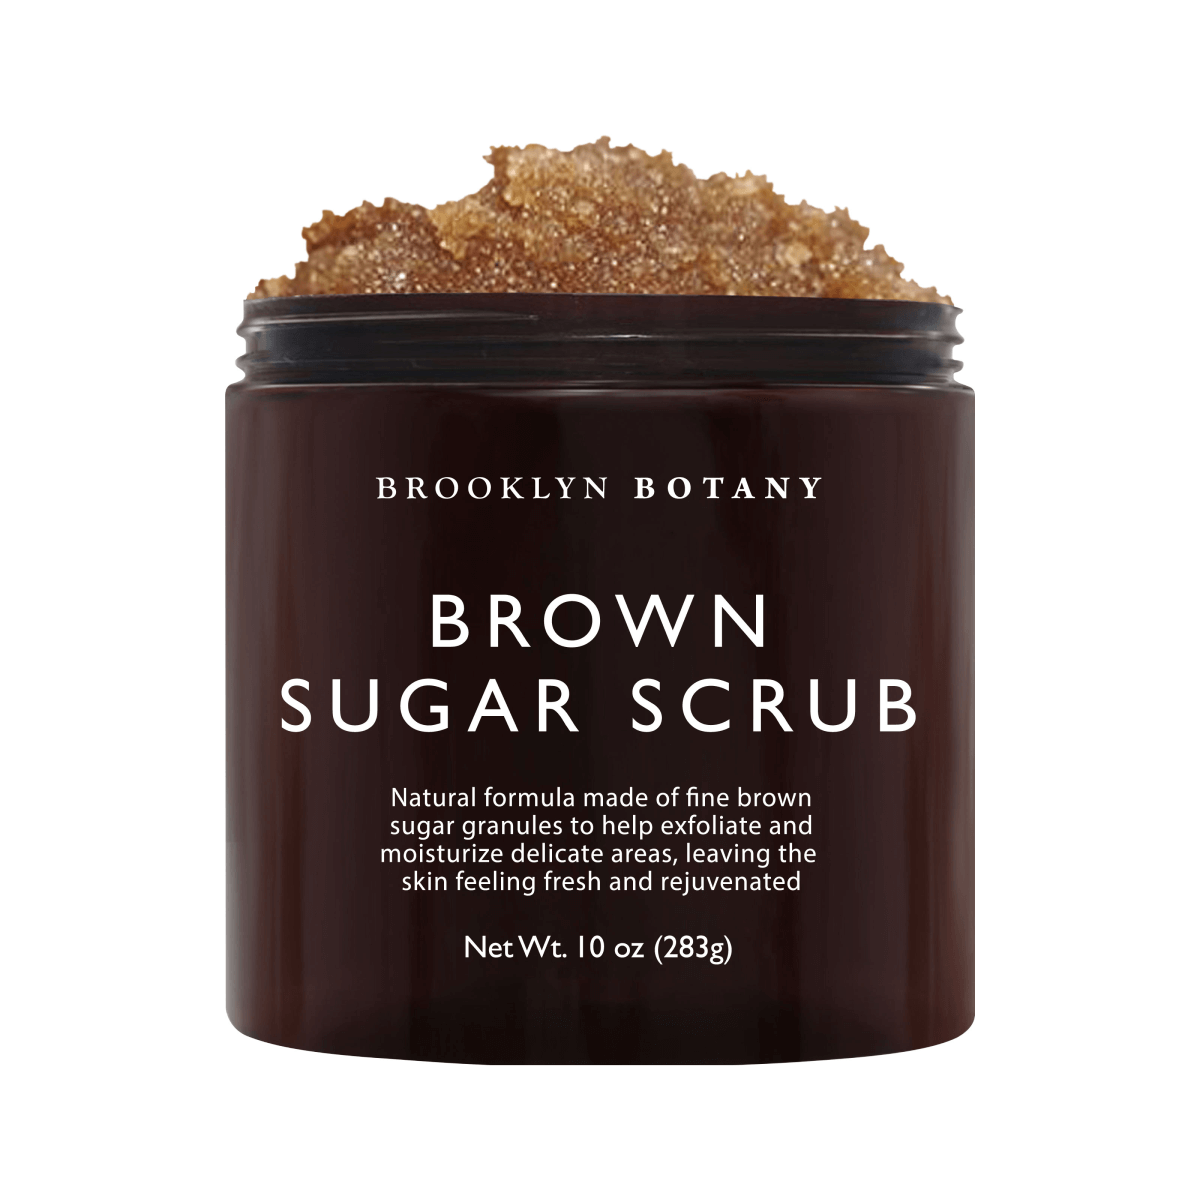 Brooklyn Botany Brown Sugar Body Scrub - 10 oz - Moisturizing and Exfoliating Body, Face, Hand, Foot Scrub - Fights Acne Scars, Stretch Marks, Fine Lines & Wrinkles, Great Gifts For Women & Men - 10 oz 10 Ounce (Pack of 1) Jar